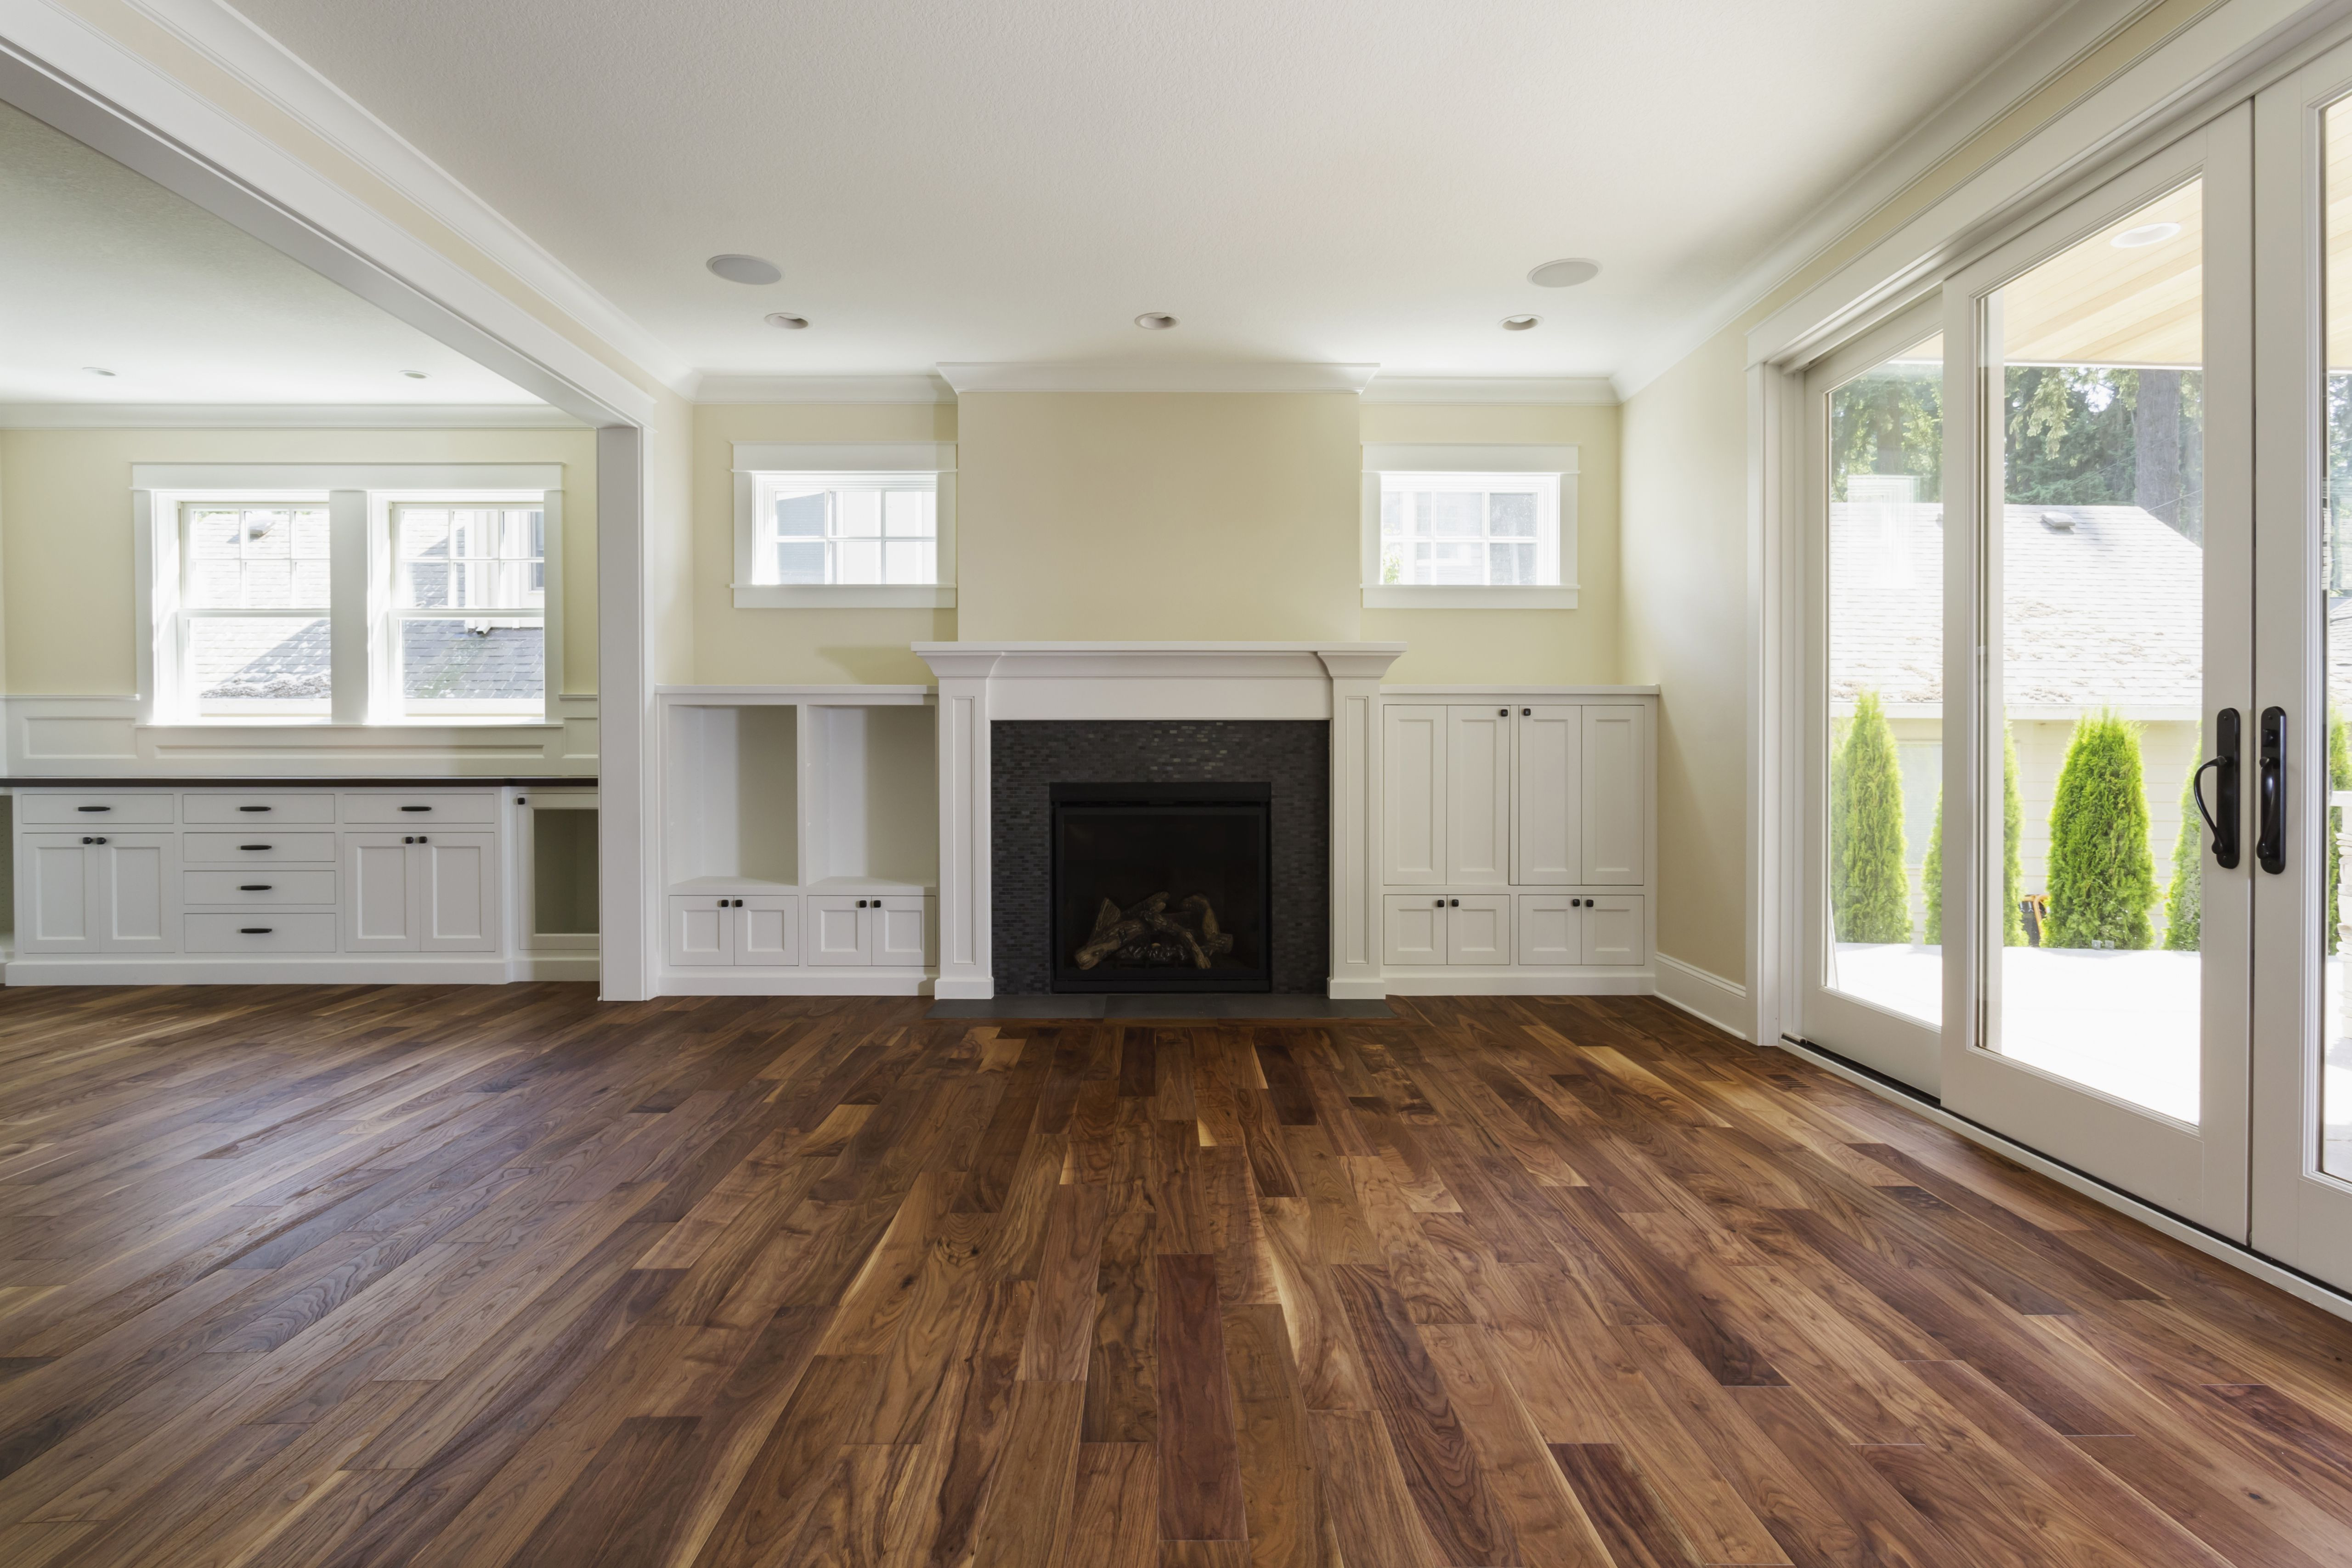 21 Stunning How to Clean Old Hardwood Floors Under Carpet 2024 free download how to clean old hardwood floors under carpet of the pros and cons of prefinished hardwood flooring throughout fireplace and built in shelves in living room 482143011 57bef8e33df78cc16e03539